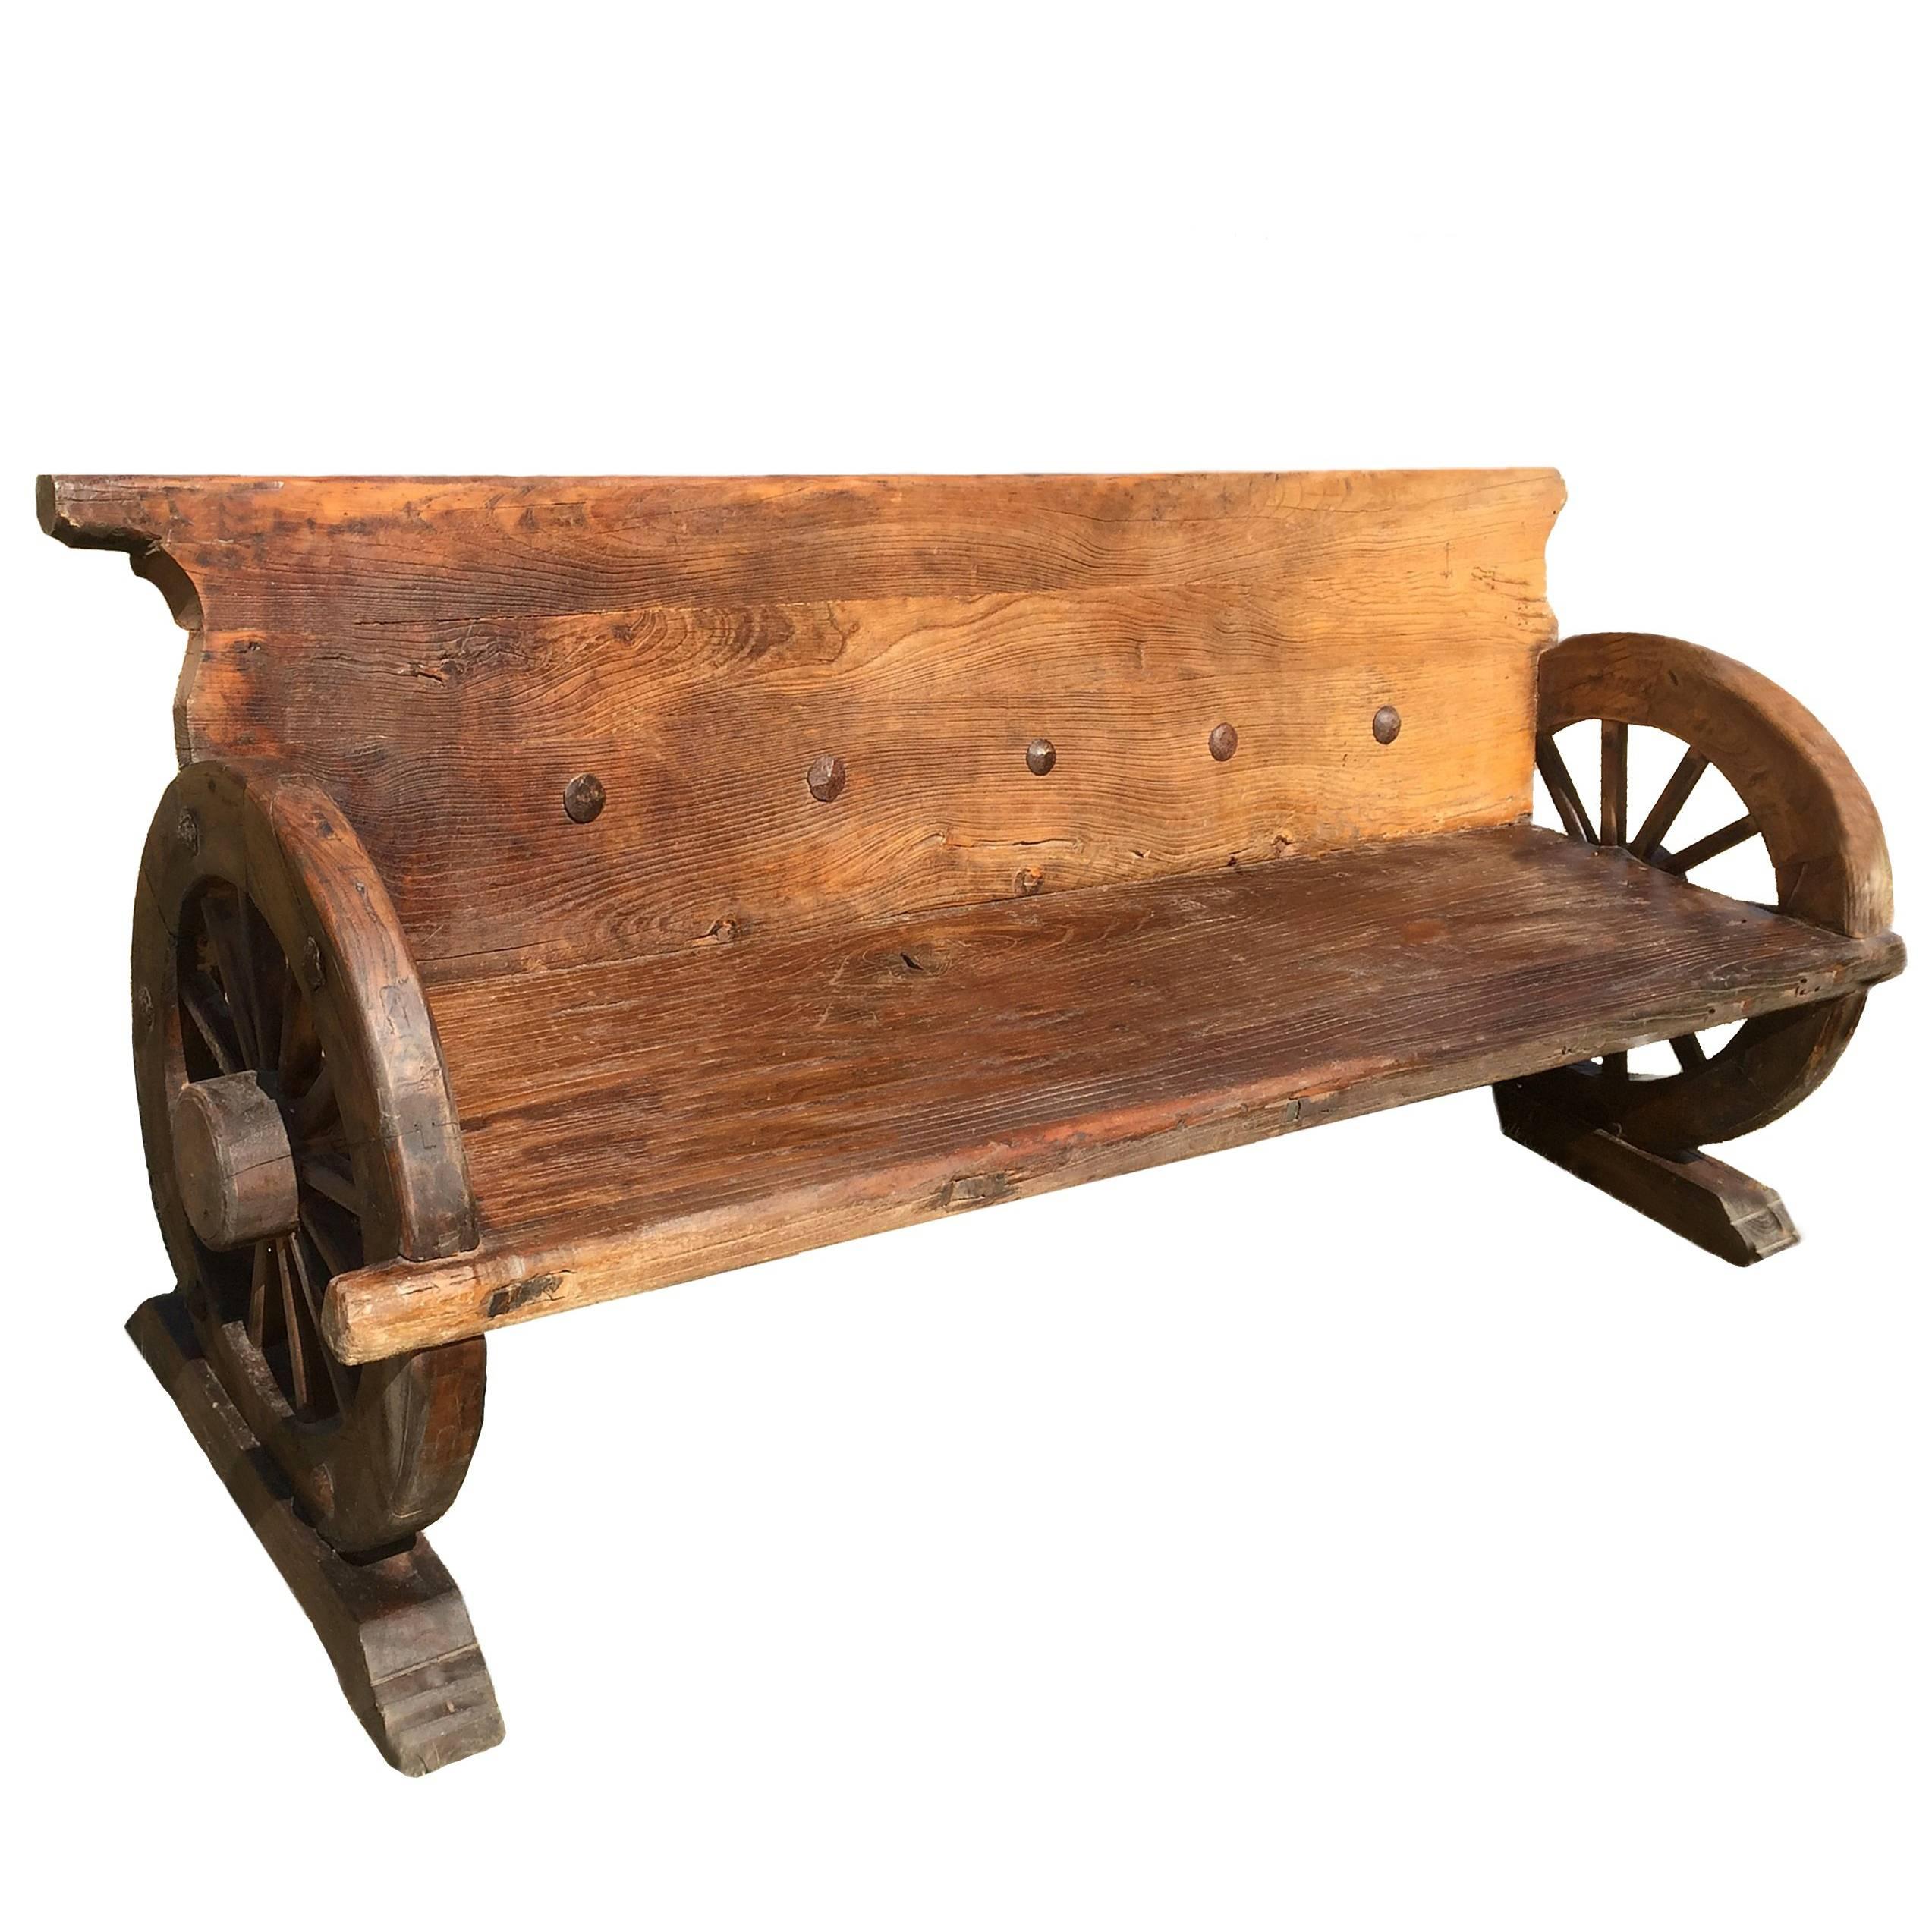 Rustic Bench with Antique Wheels and Iron Studs